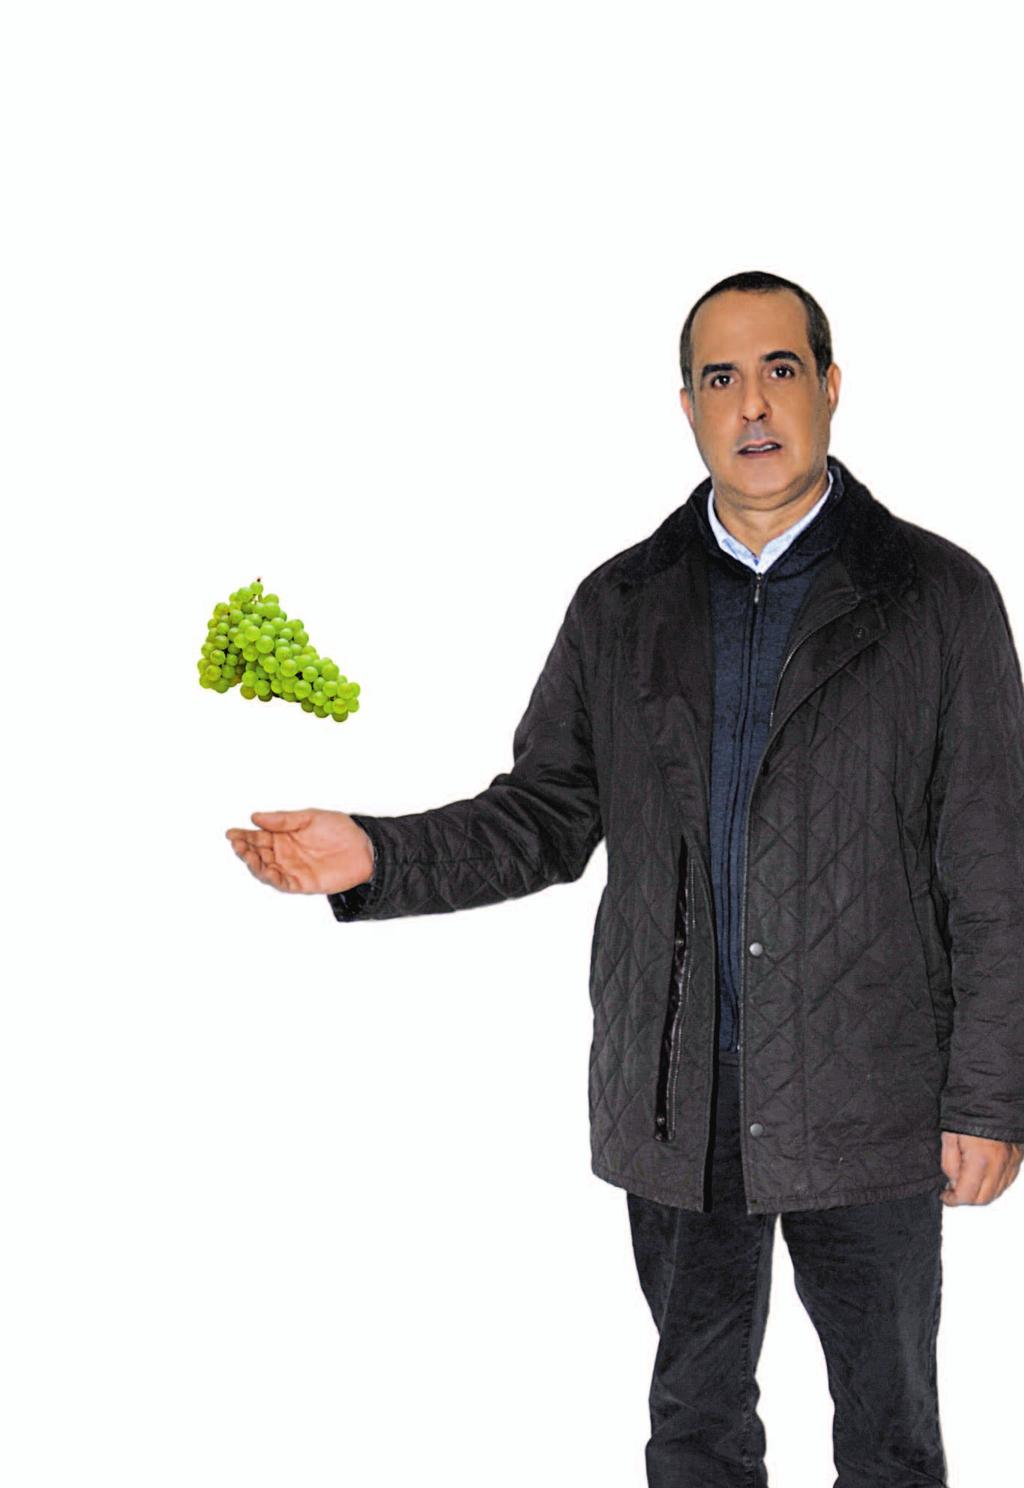 The Moroccan Table Grape Project Commitment of all